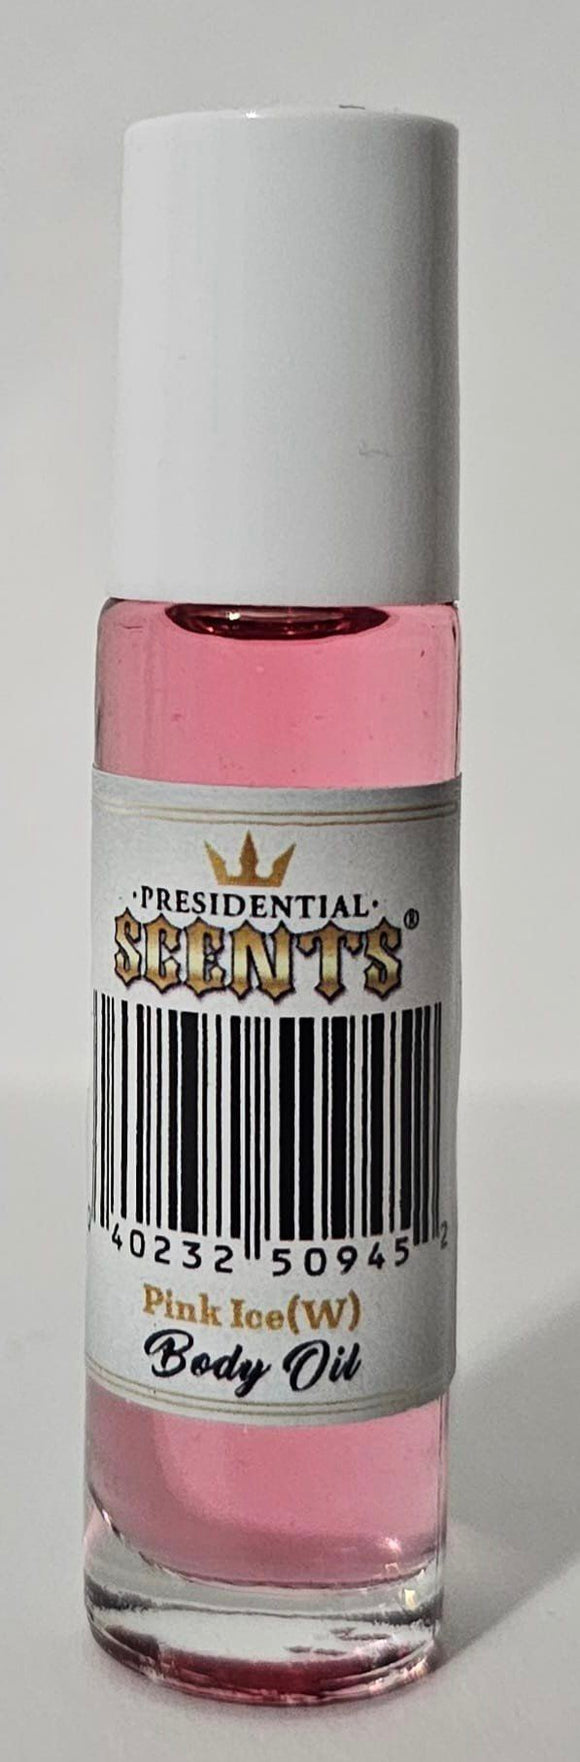 PRESIDENTIAL SCENTS - PINK ICE (W) Body Oil